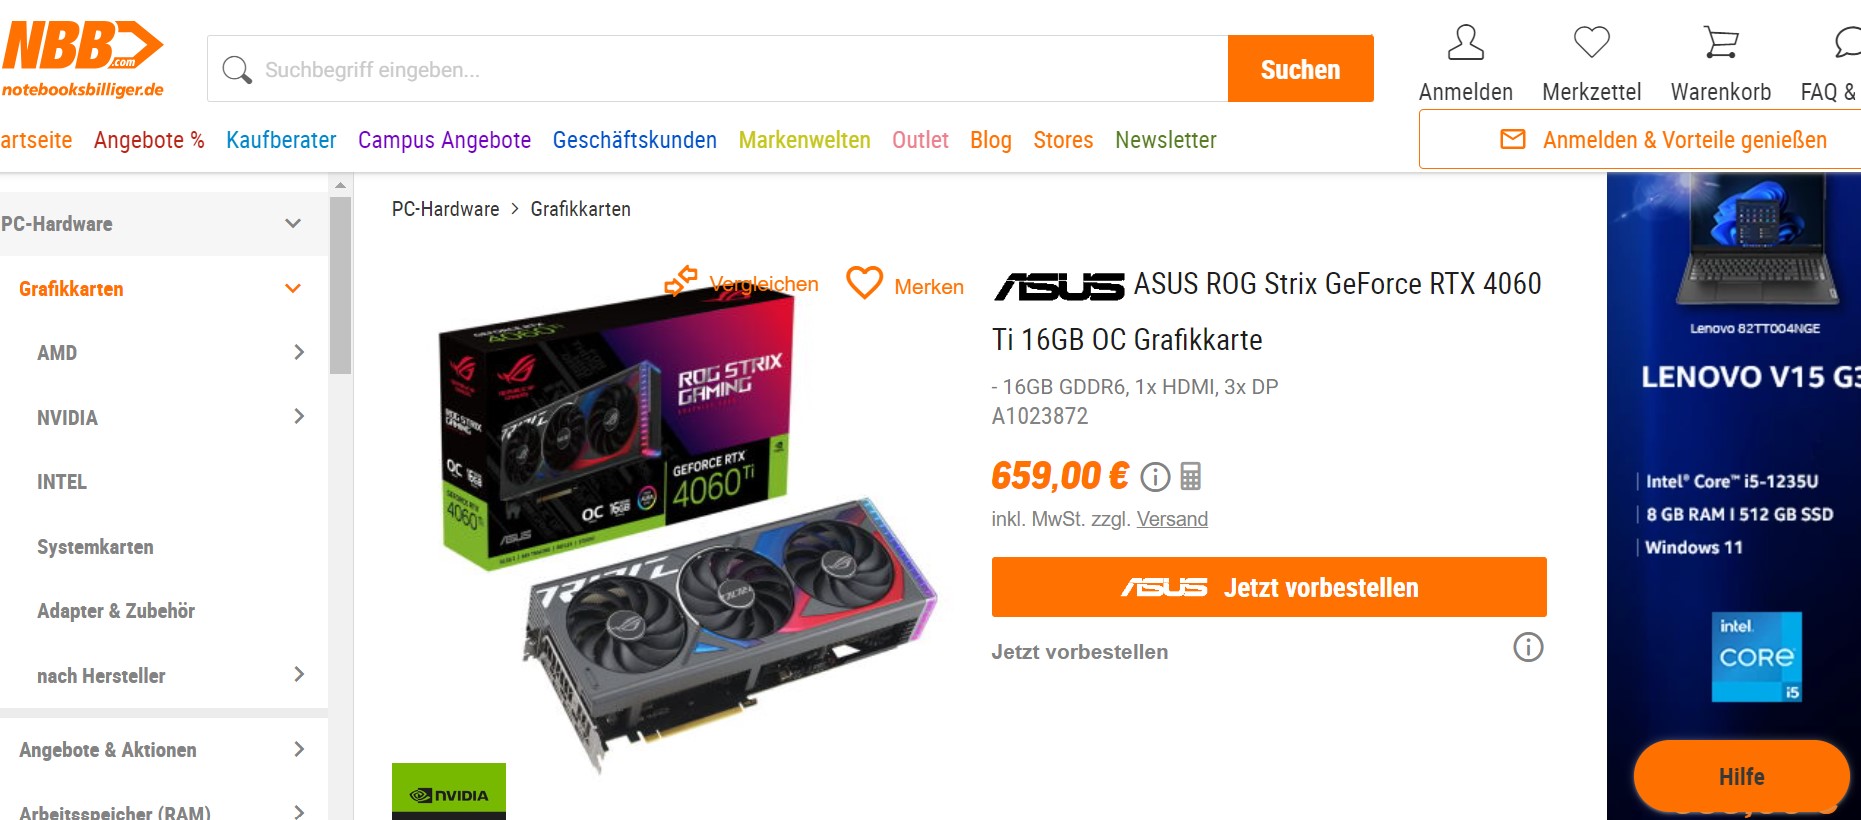 Eye-watering ASUS ROG Strix 4060 GB price makes card more than much better RTX 4070 - NotebookCheck.net News